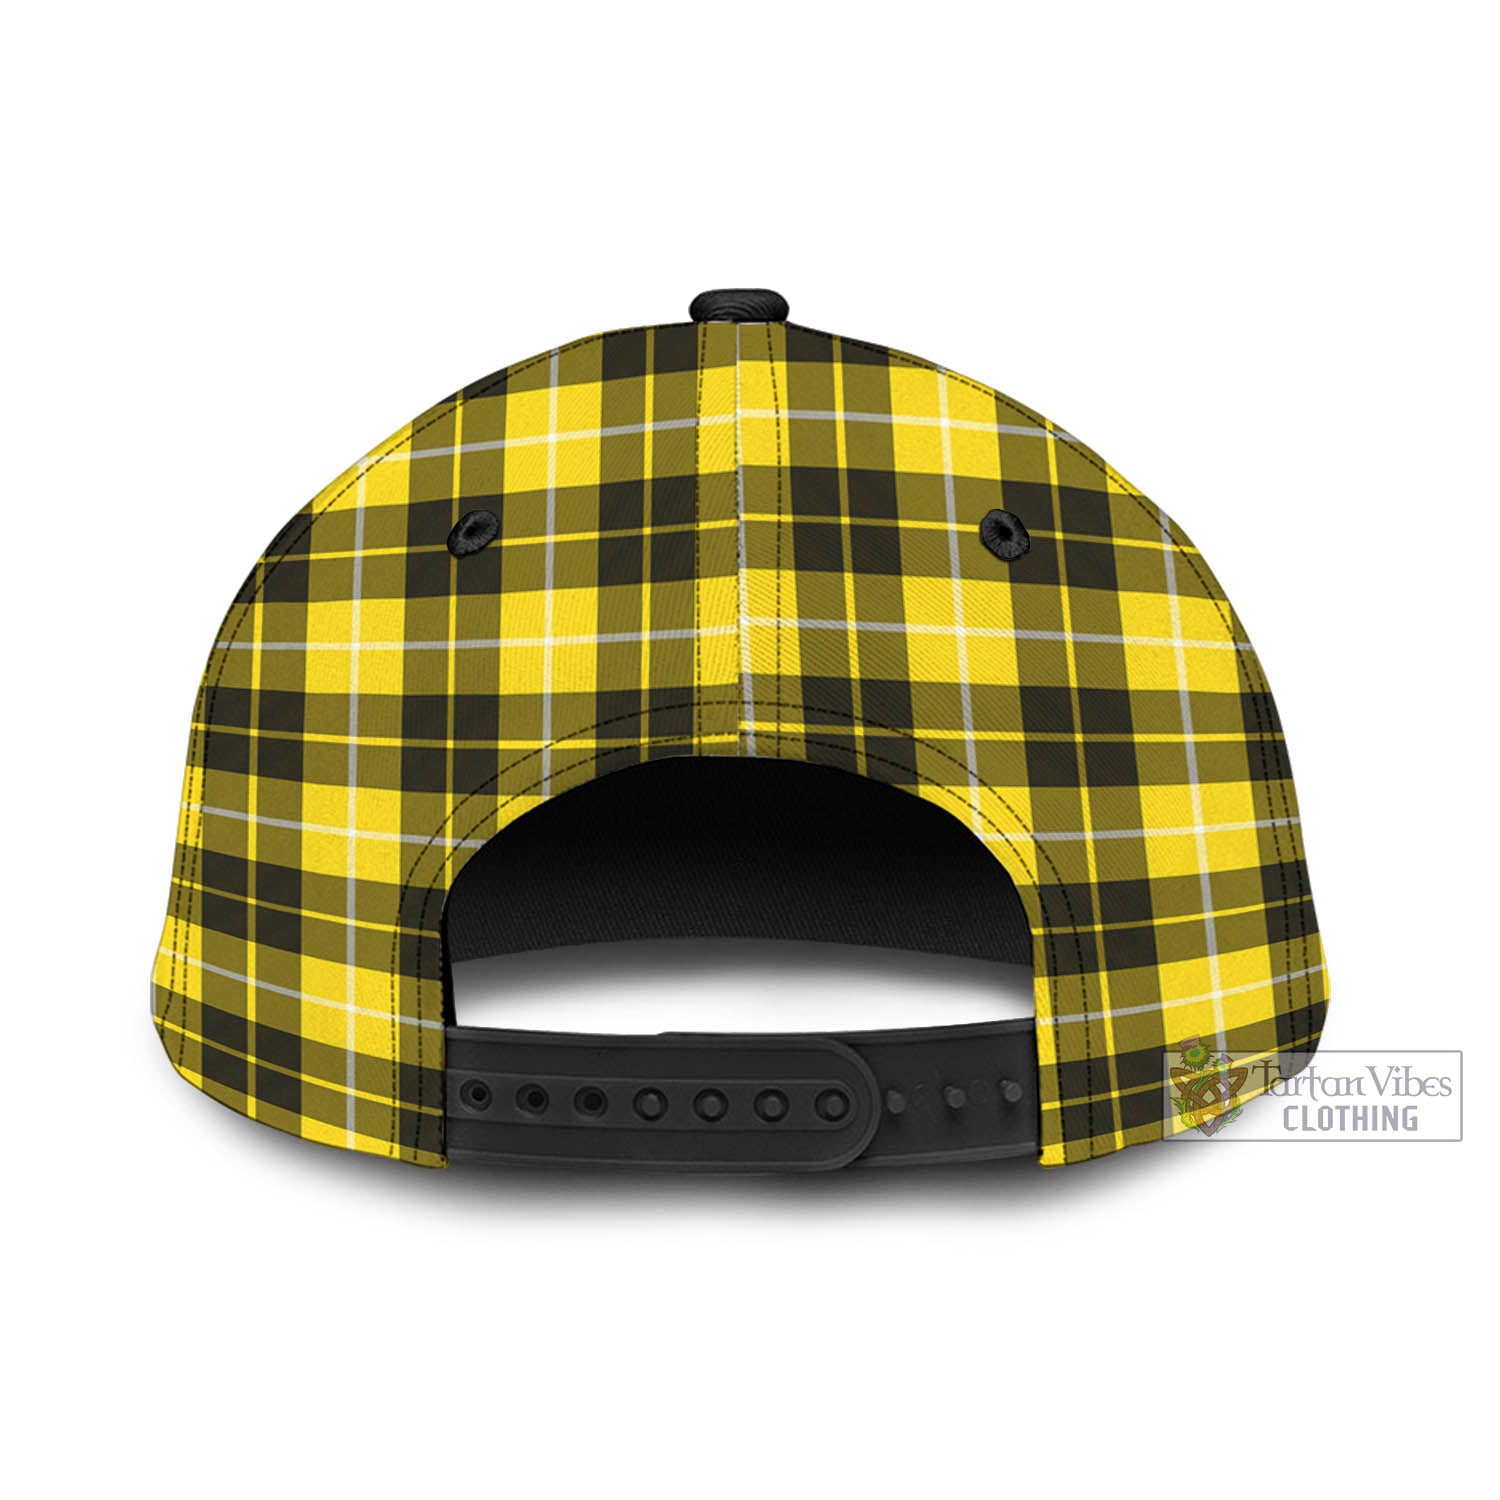 Tartan Vibes Clothing Barclay Dress Modern Tartan Classic Cap with Family Crest In Me Style